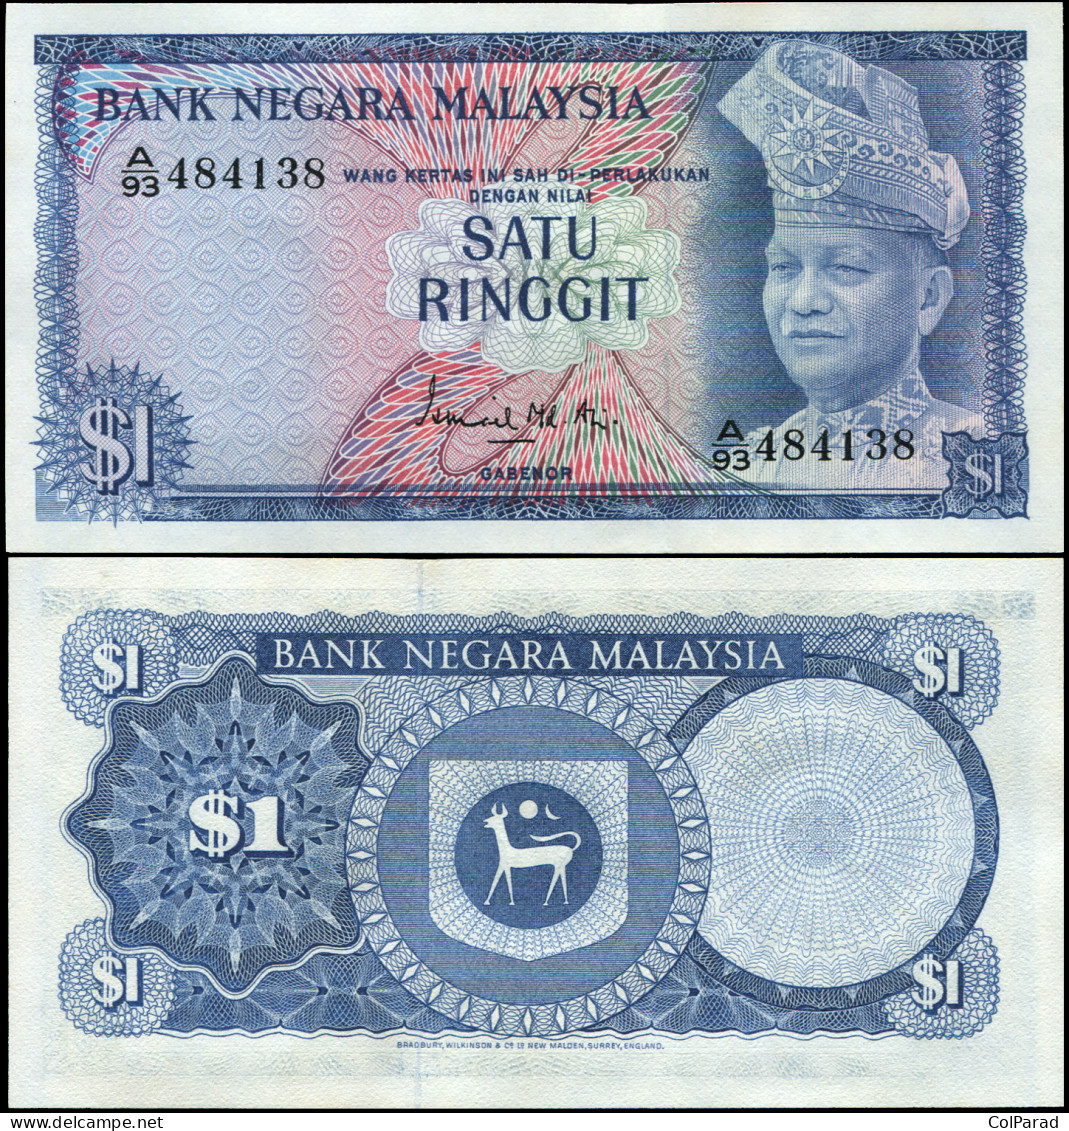 MALAYSIA 1 RINGGIT - ND (1967) - Paper Unc - P.1a Banknote - Malesia